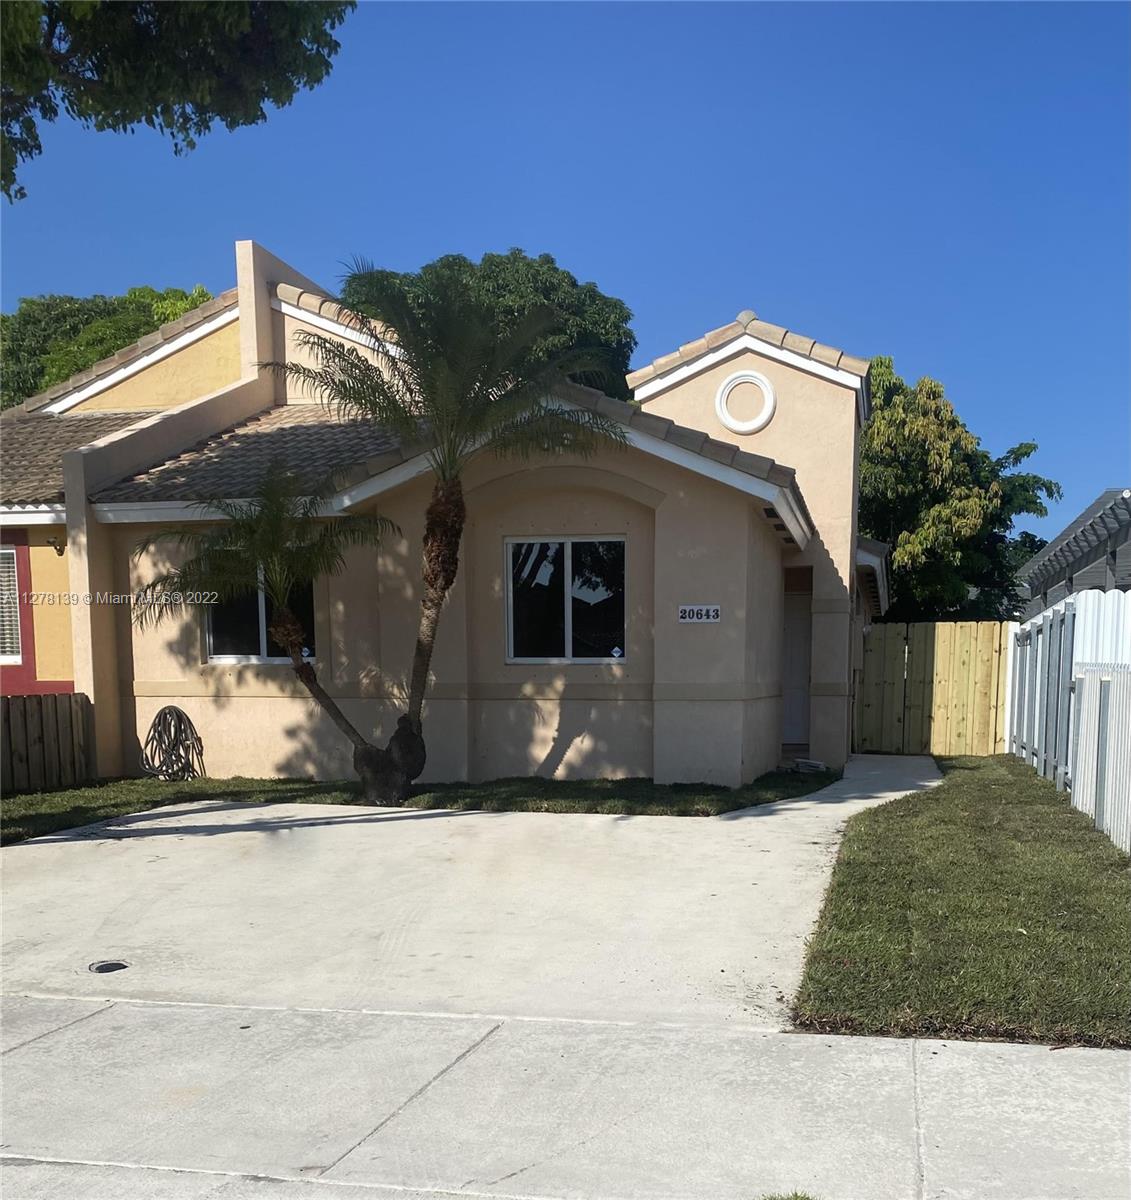 COMFORTABLE SINGLE STORY 3 BR/2 BA SINGLE STORY HOME IN CUTLER BAY.  OFFERS LAMINATE & TILE FLOORING THROUGHOUT, NEW STAINLESS APPLIANCES, NEWER AC, SEPARATE LIVING, DINING AND FAMILY ROOMS AND FENCED IN YARD.  GREAT LOCATION! CLOSE TO SCHOOLS, SHOPPING, RESTAURANTS, PLACES OF WORSHIP AND TURNPIKE.